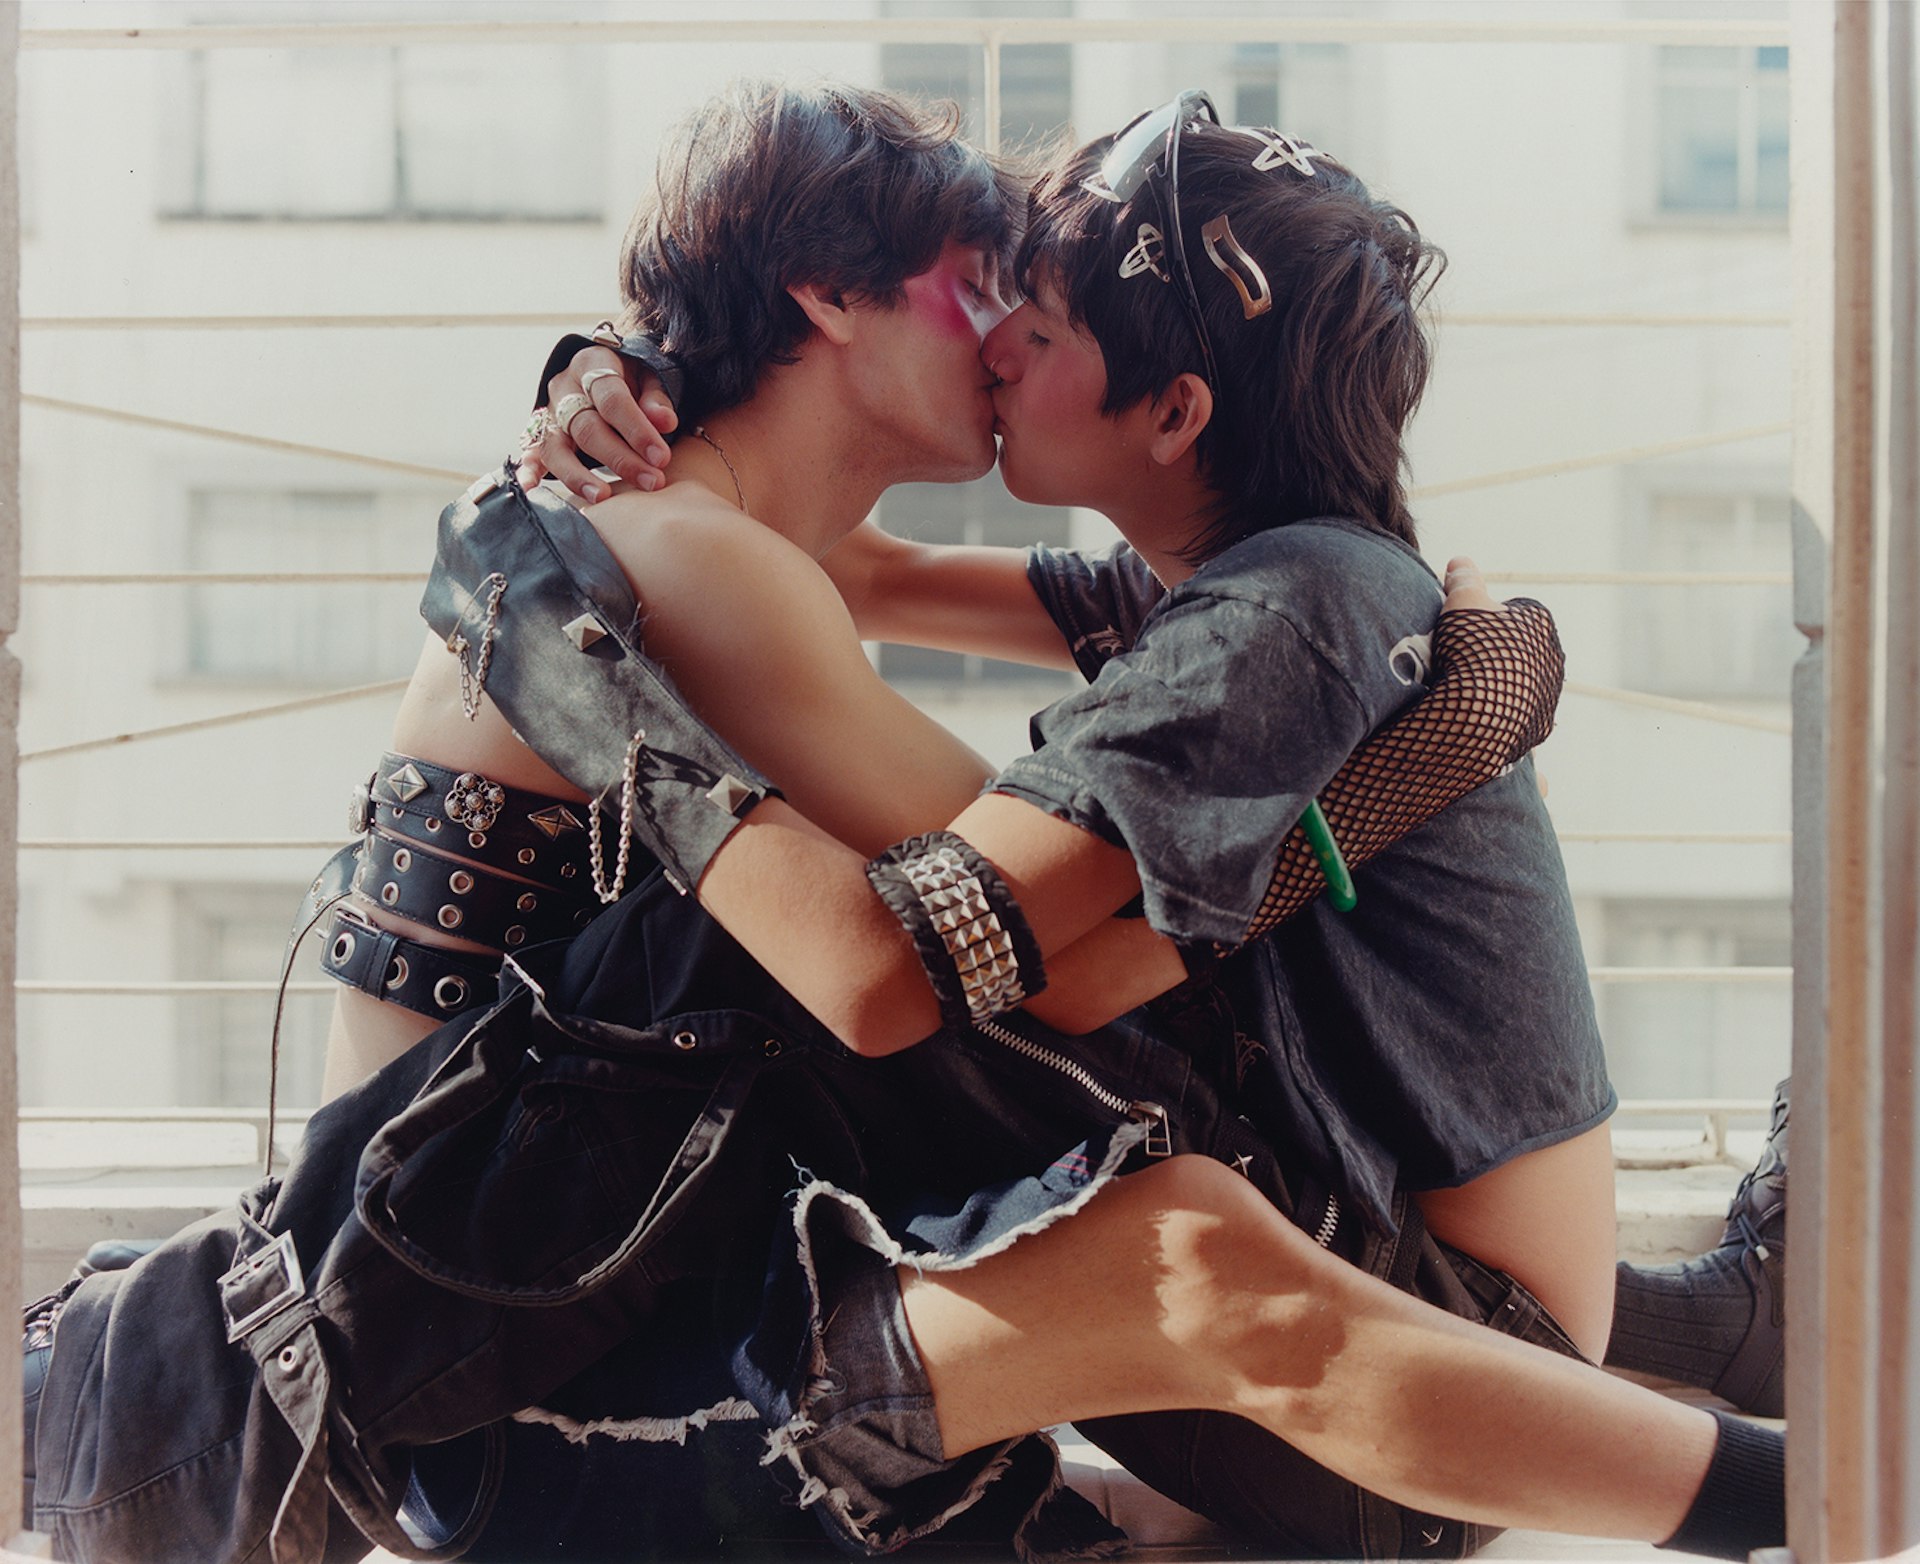 An insider’s view of Mexico City’s LGBTQ+ community